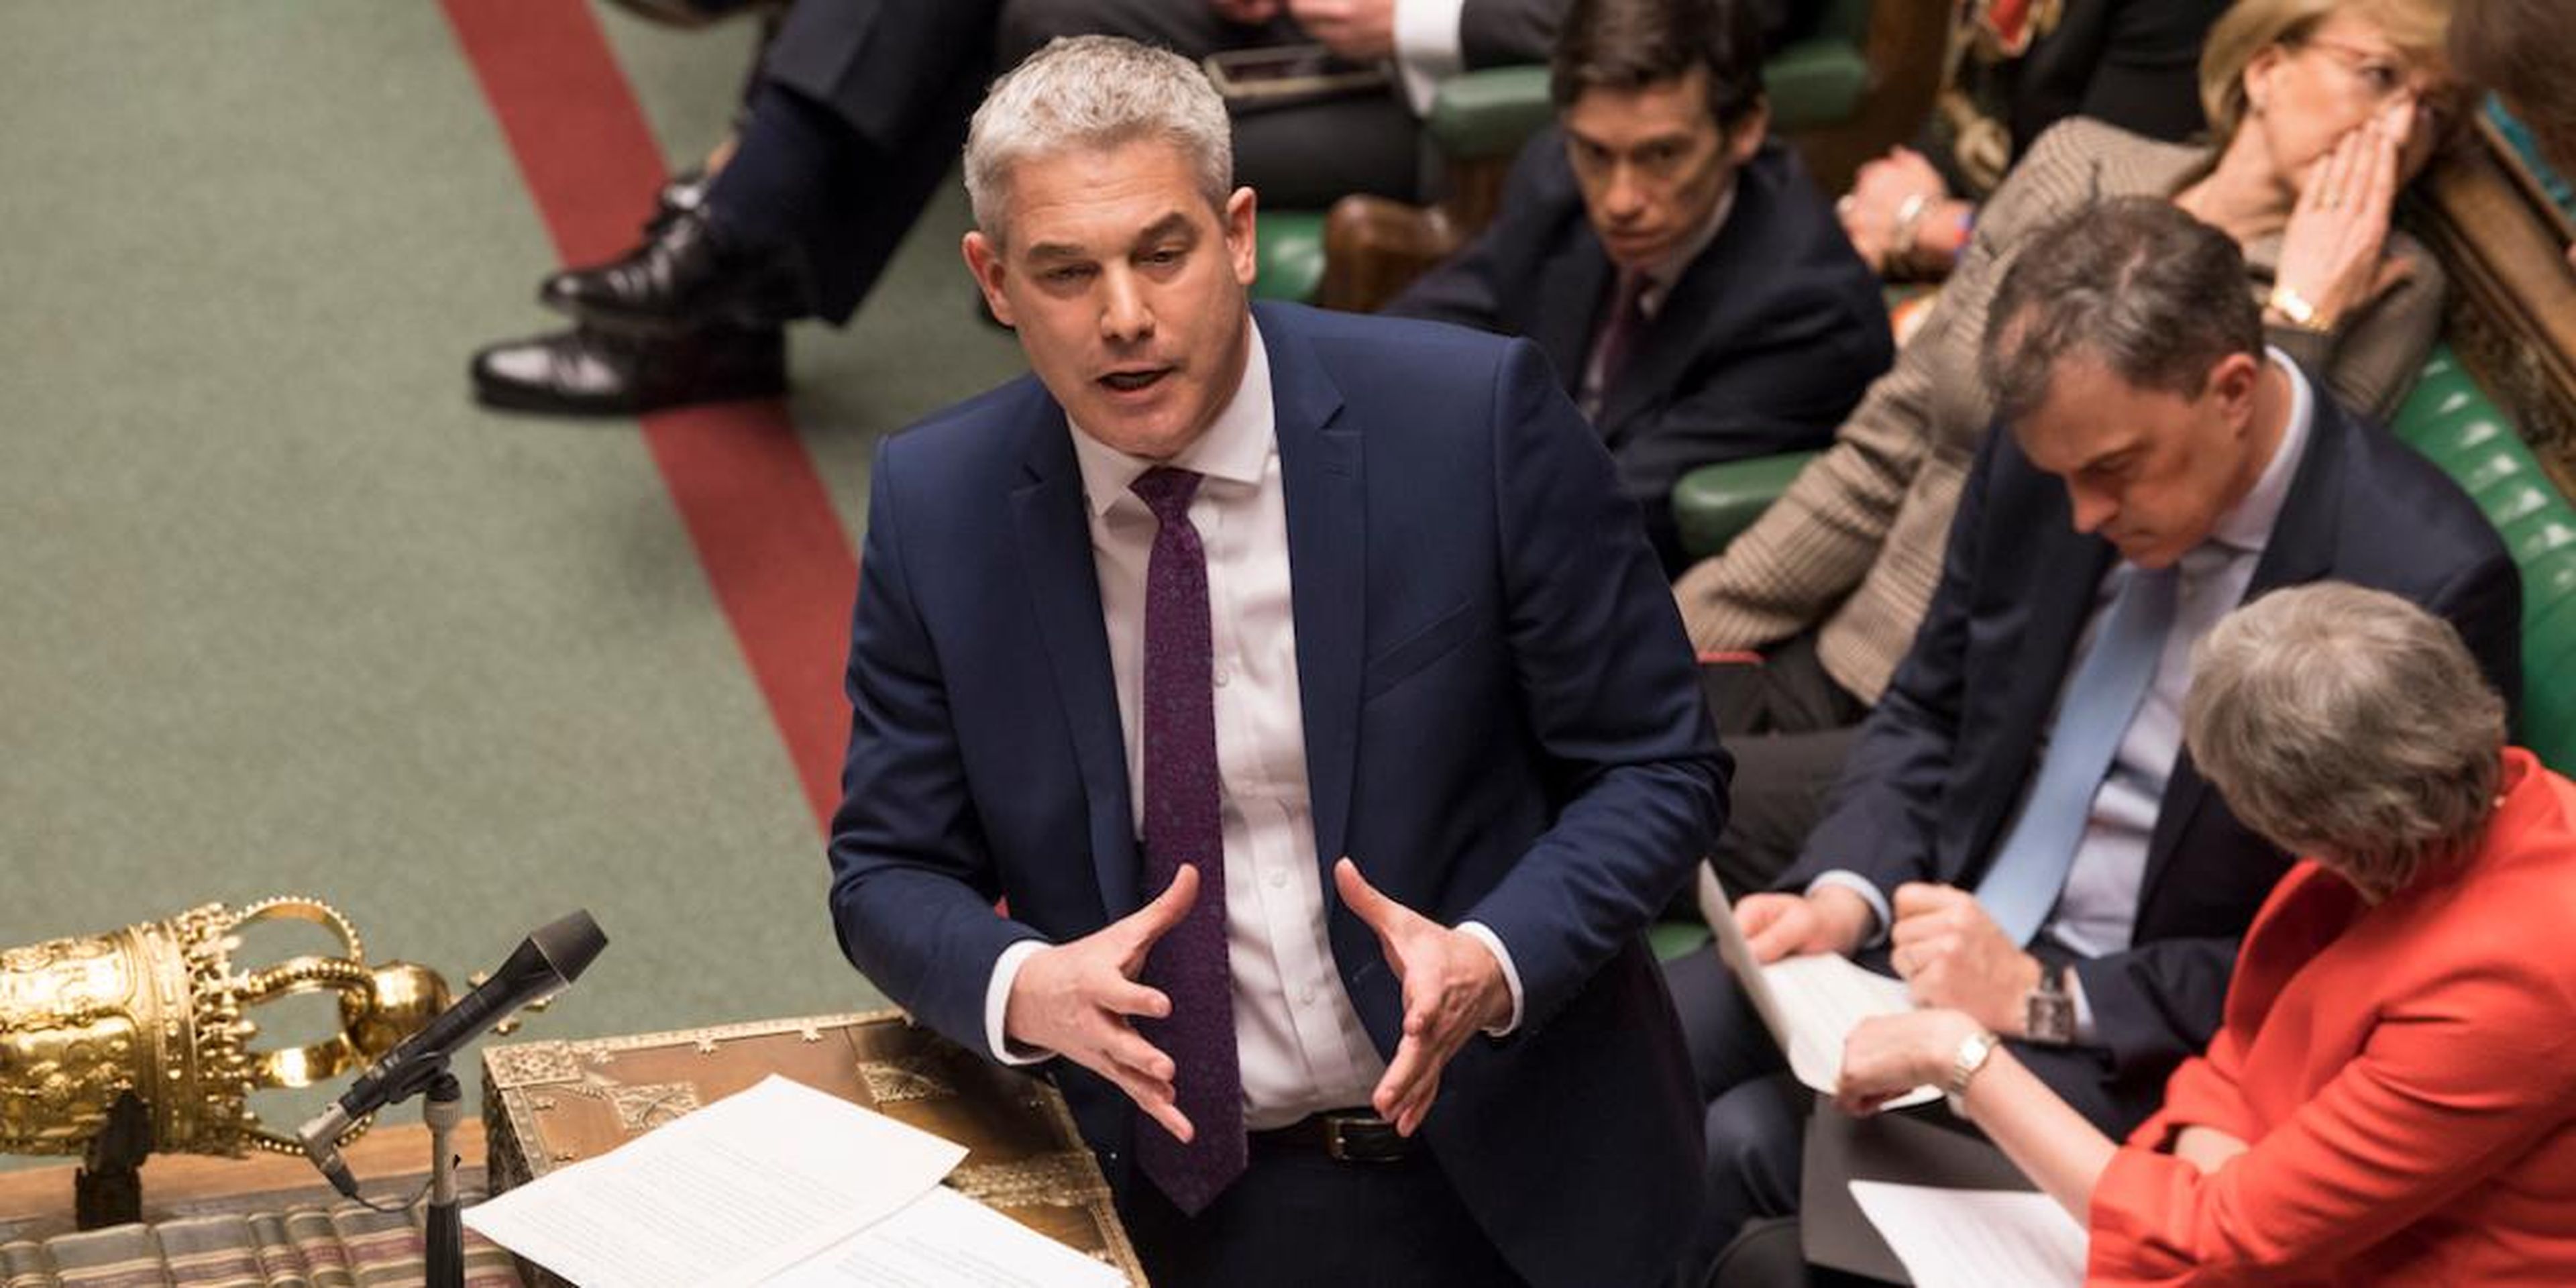 The UK Brexit secretary Steve Barclay speaks before a vote on the prime minister's proposed Brexit deal, 12 March, 2019.